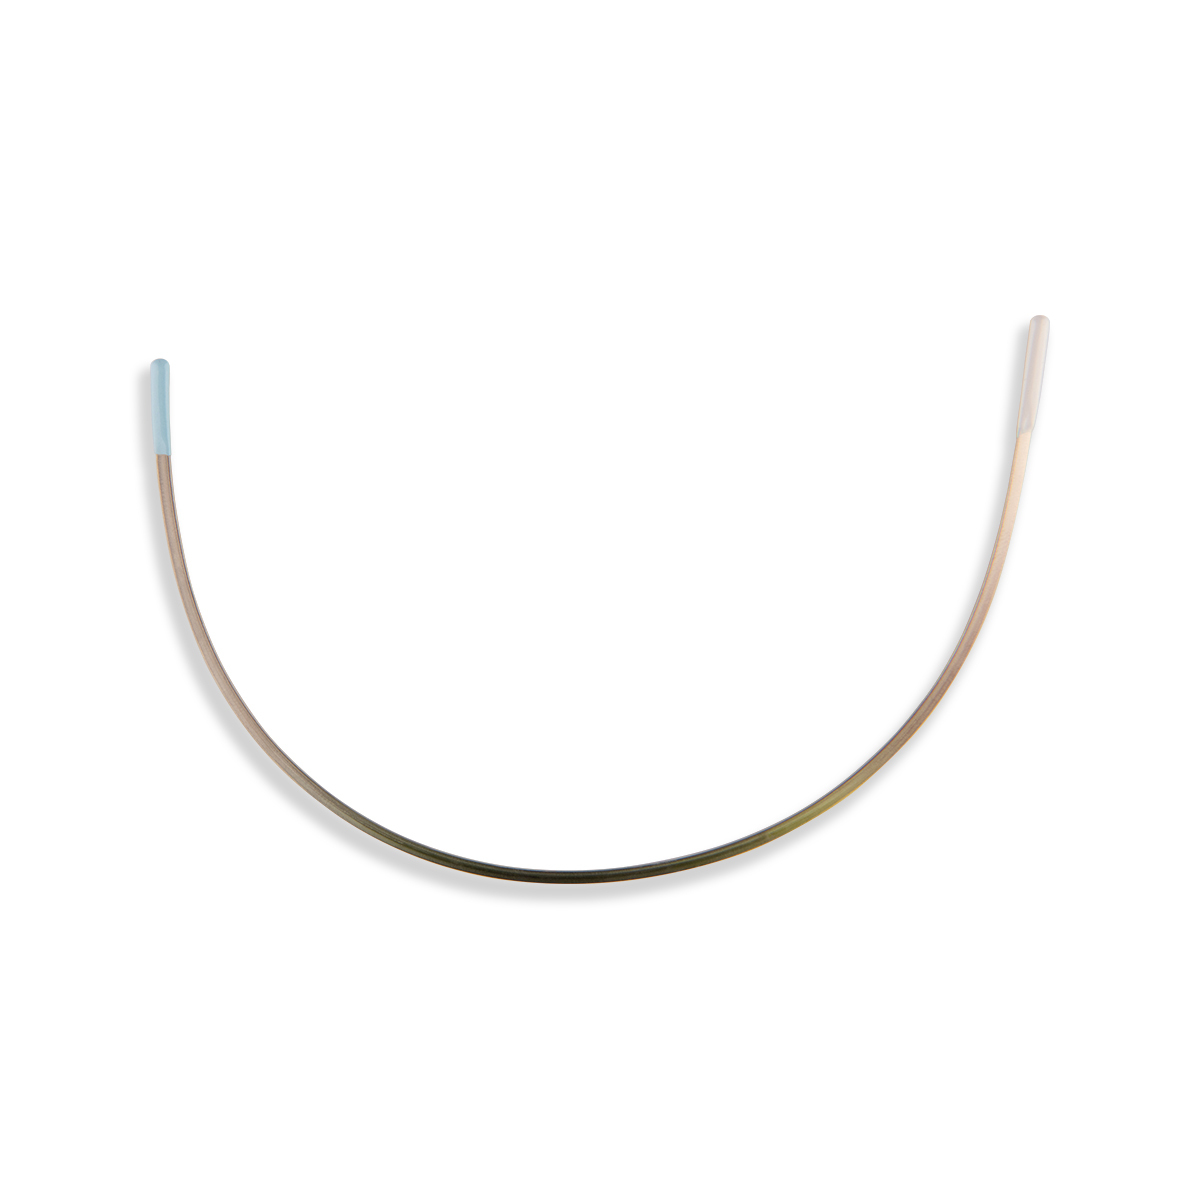 12 Pairs Coated Bra Underwire Replacement Stainless Steel Making Supplies